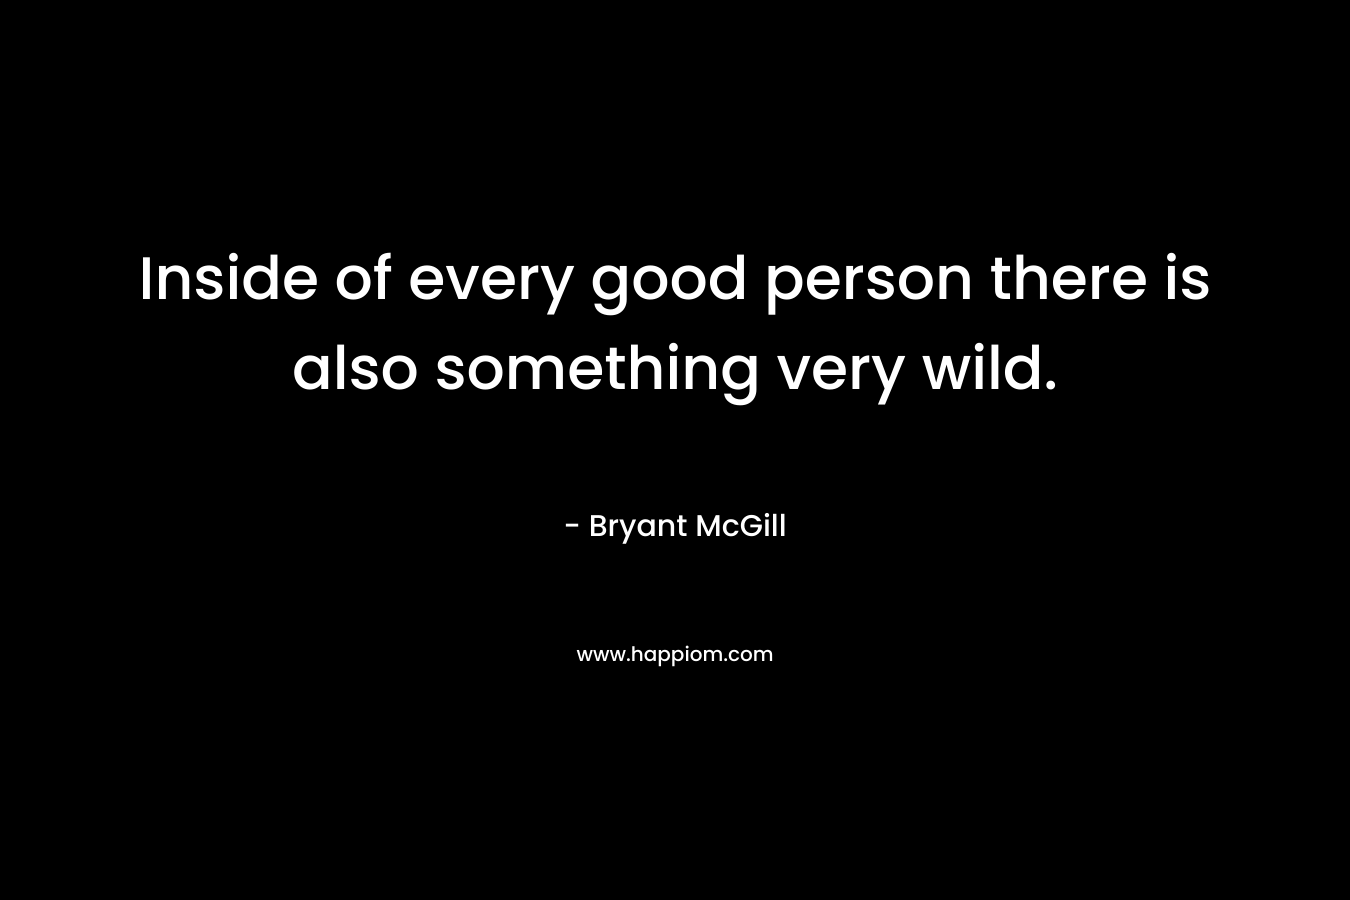 Inside of every good person there is also something very wild.